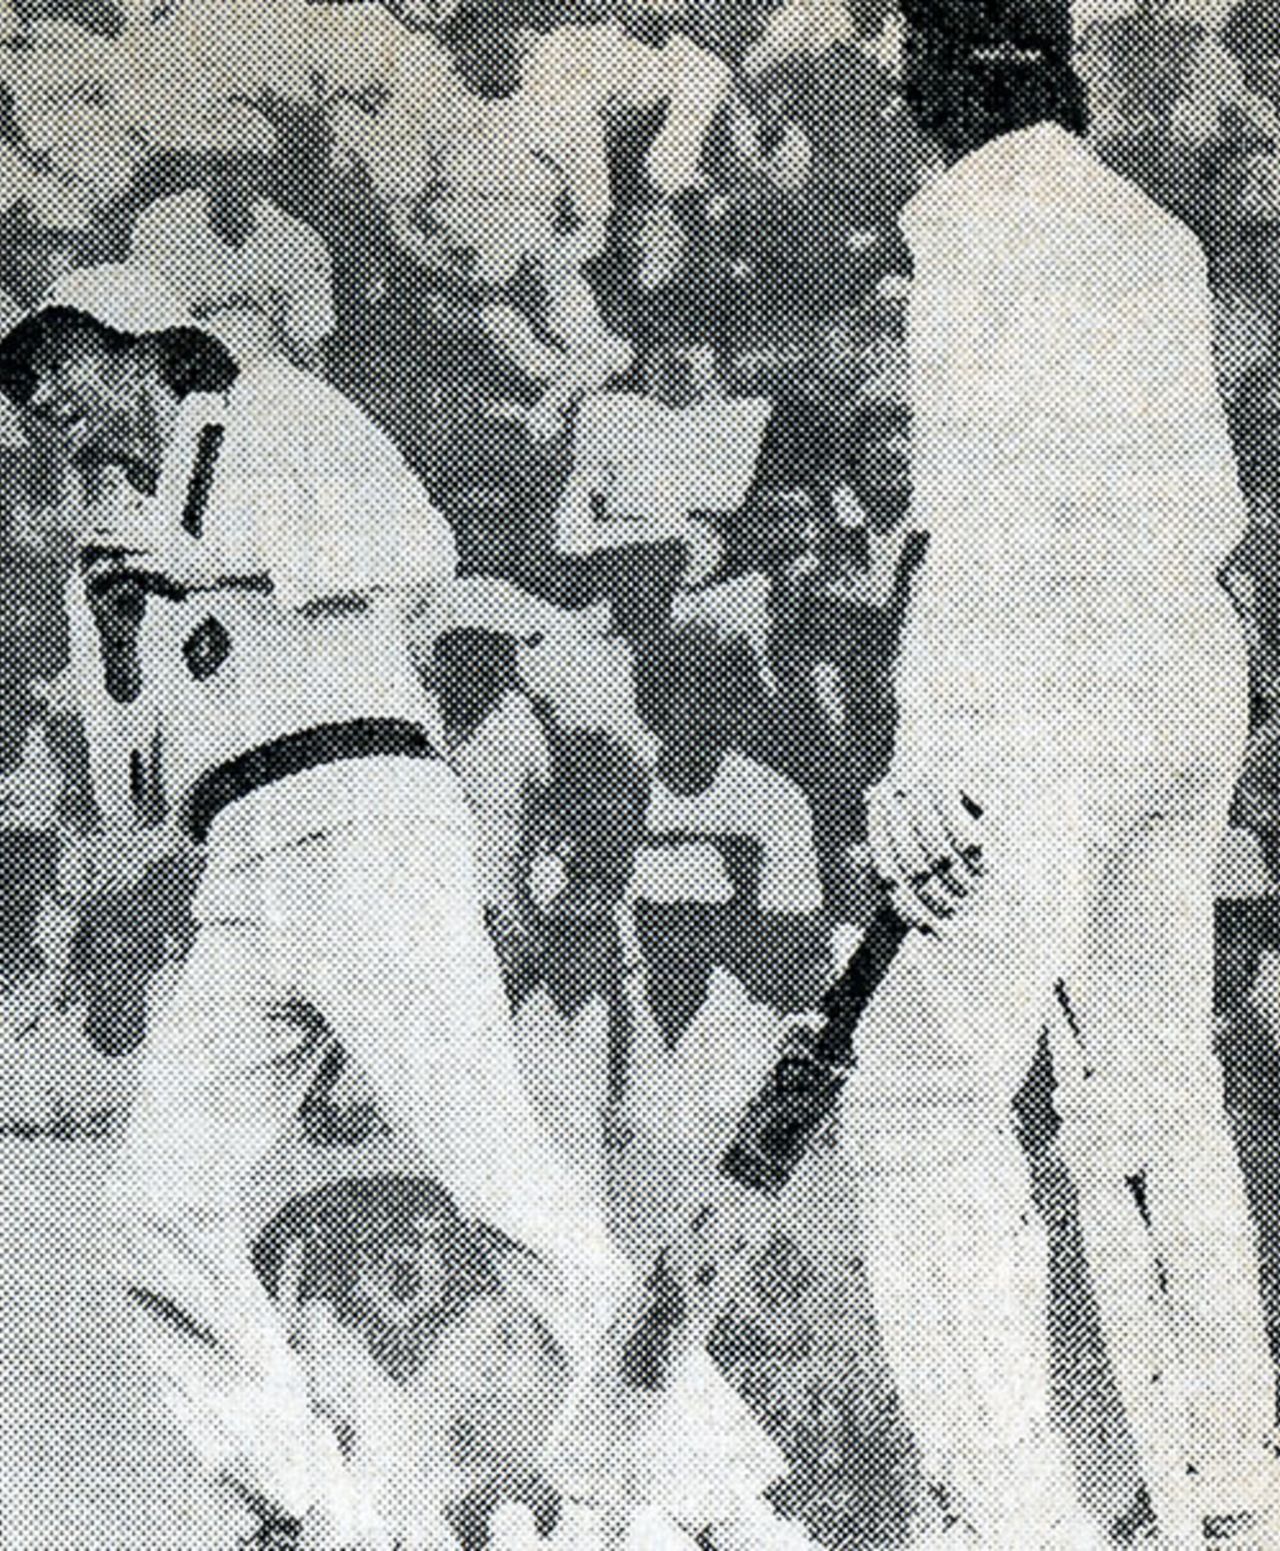 Greg Chappell catches Mohsin Khan for a world-record 121st Test catch, Australia v Pakistan, 5th Test, Sydney, January 5, 1984